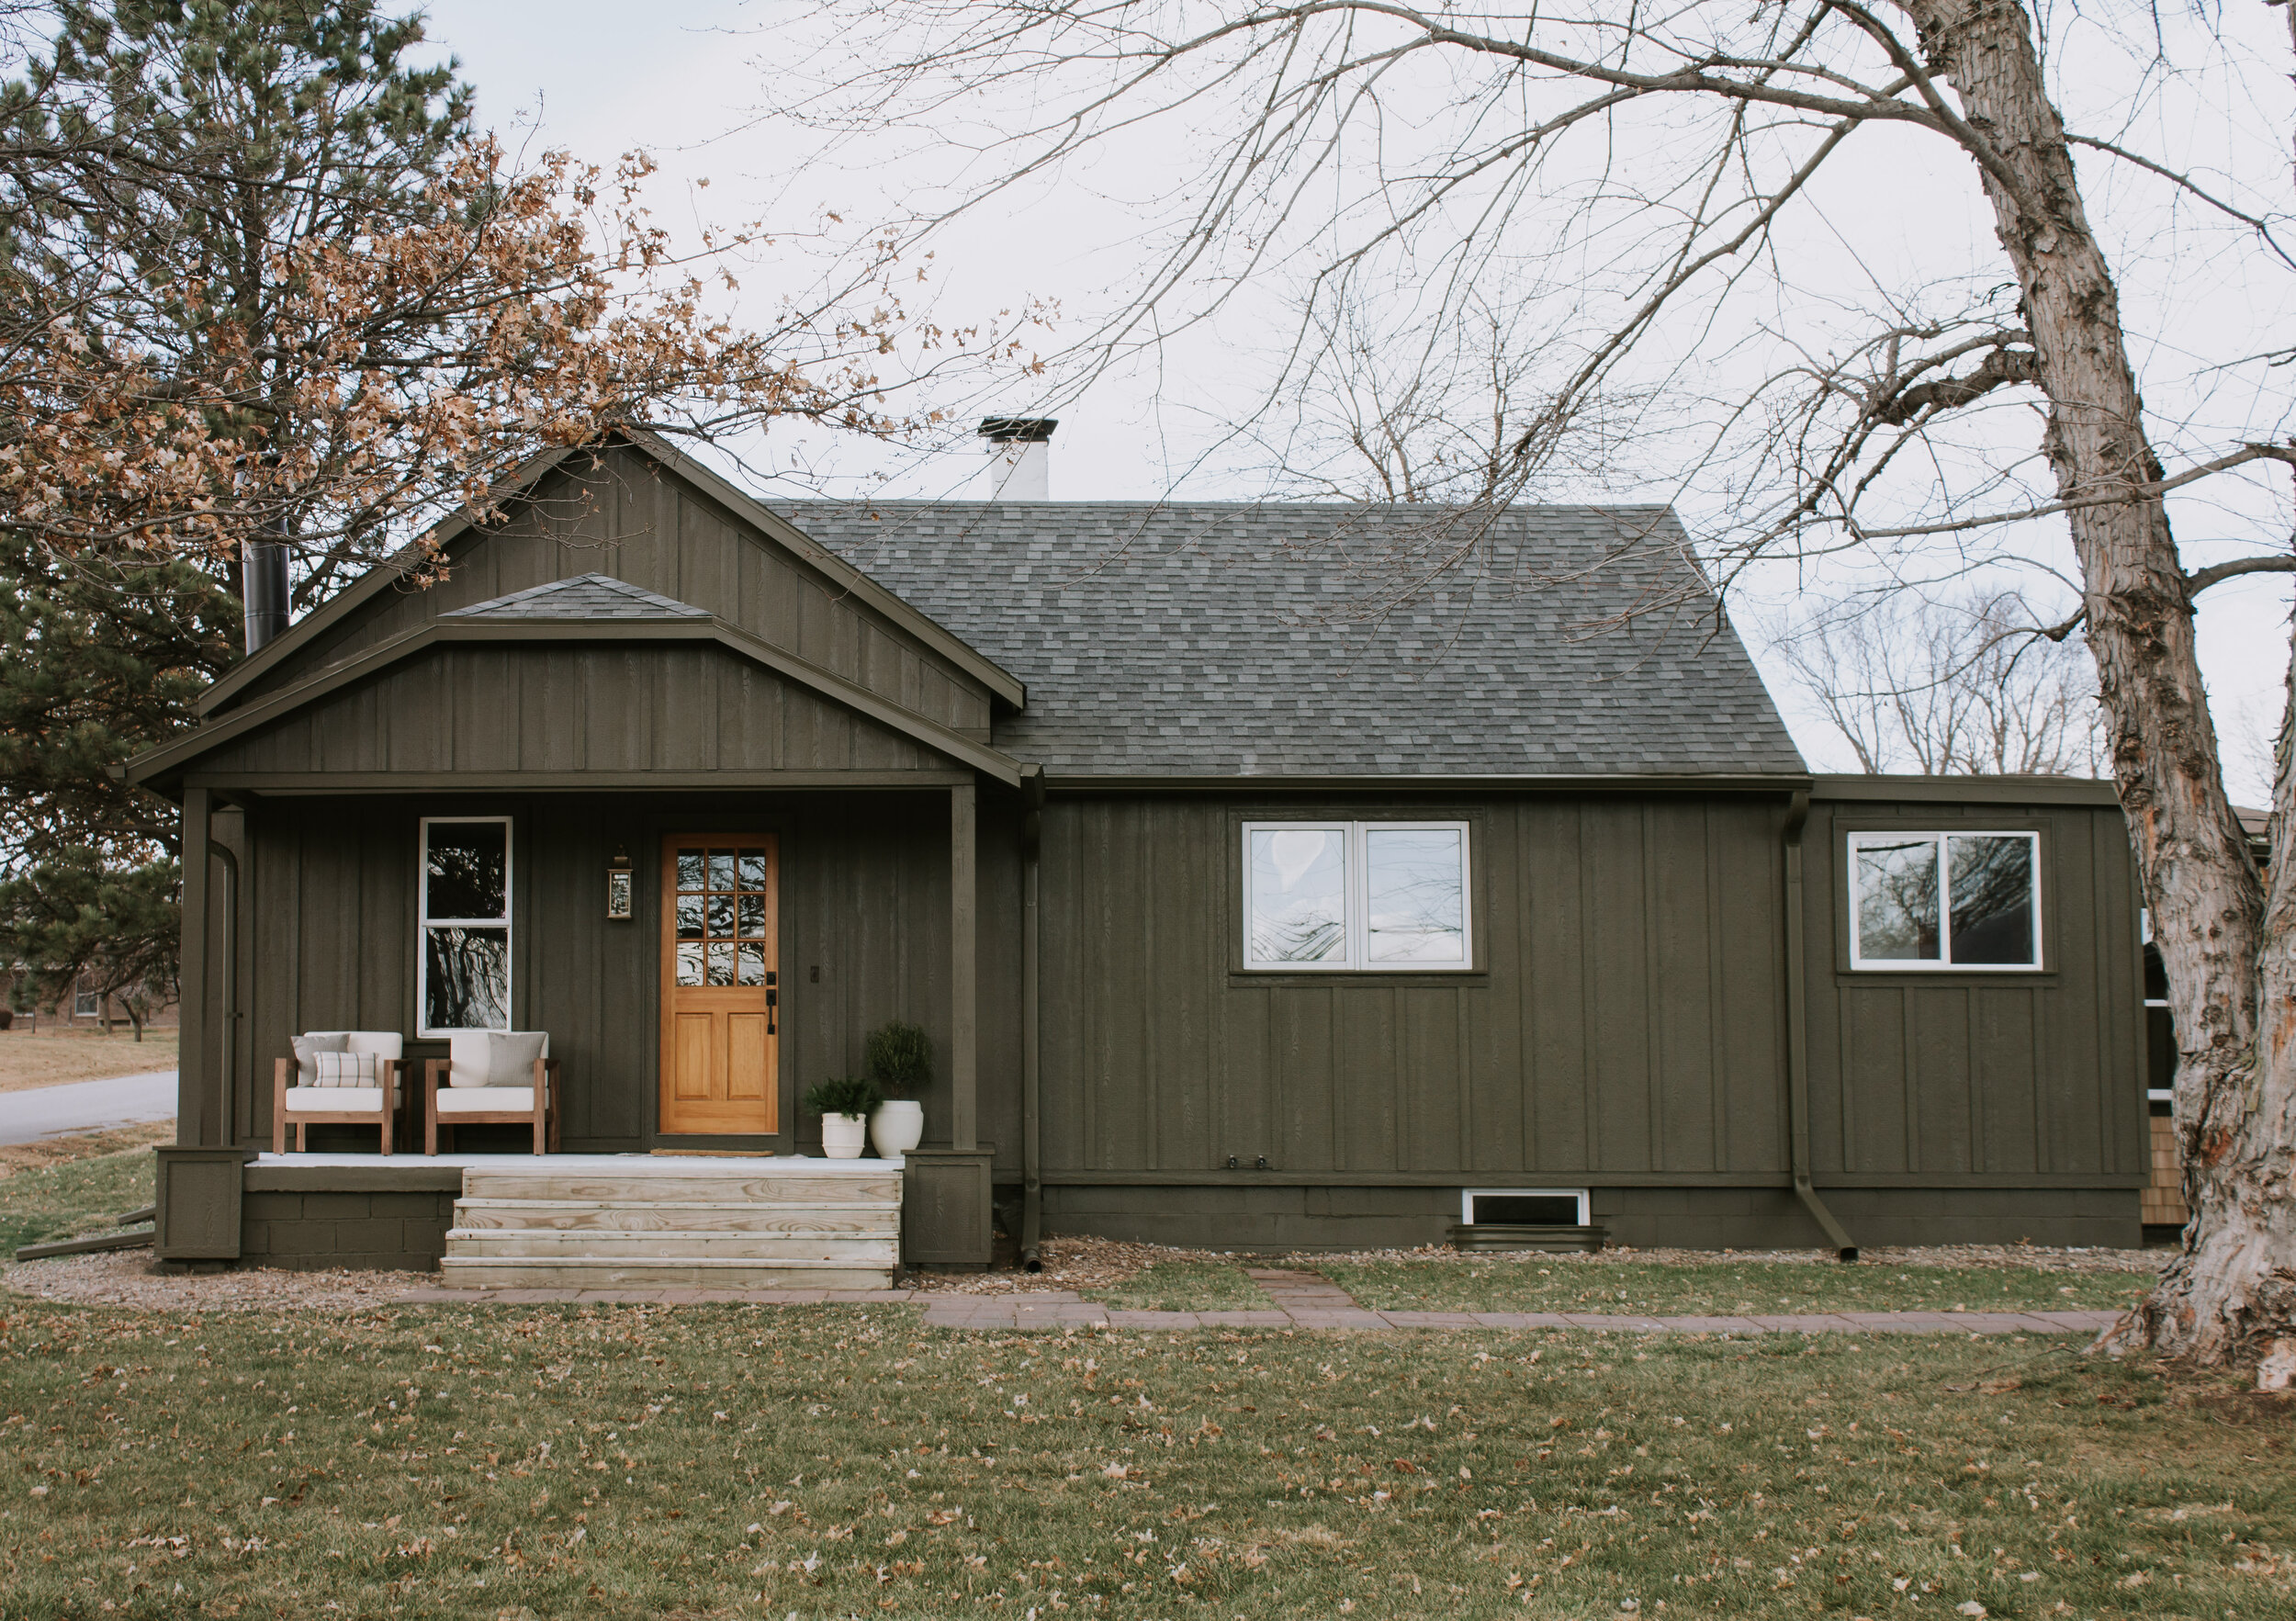 Our Home Exterior Reveal (Phase 1) | Exterior makeover and renovation. Home exterior before and after transformation. New board and batten siding and a cabin design style. Exterior paint color is Muddled Basil by Sherwin Williams | Nadine Stay